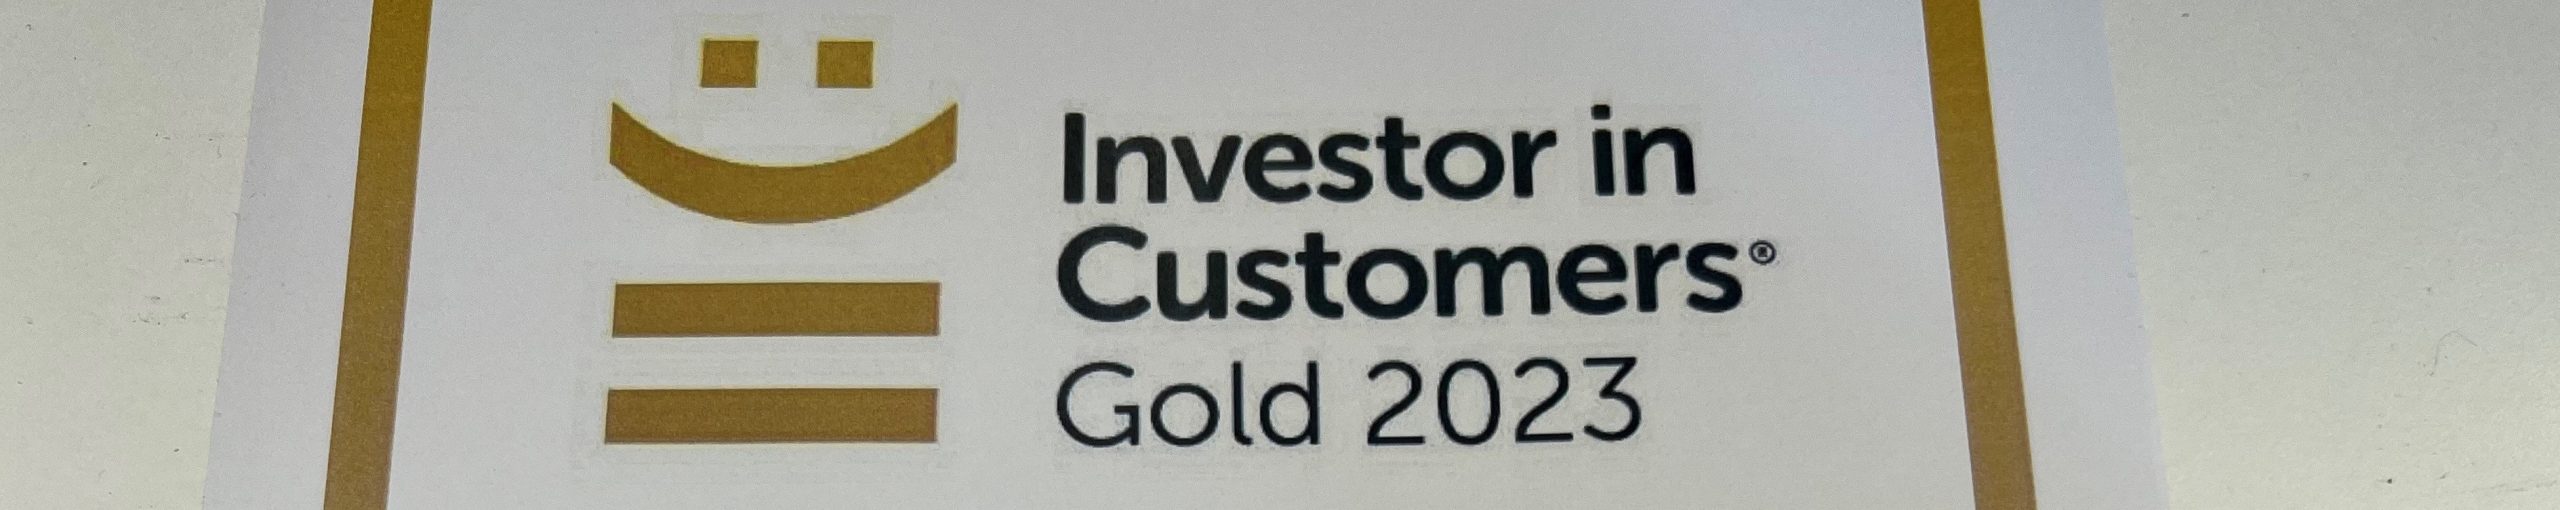 JC Payne Awarded Gold Award from Investor in Customers for Outstanding Customer Satisfaction